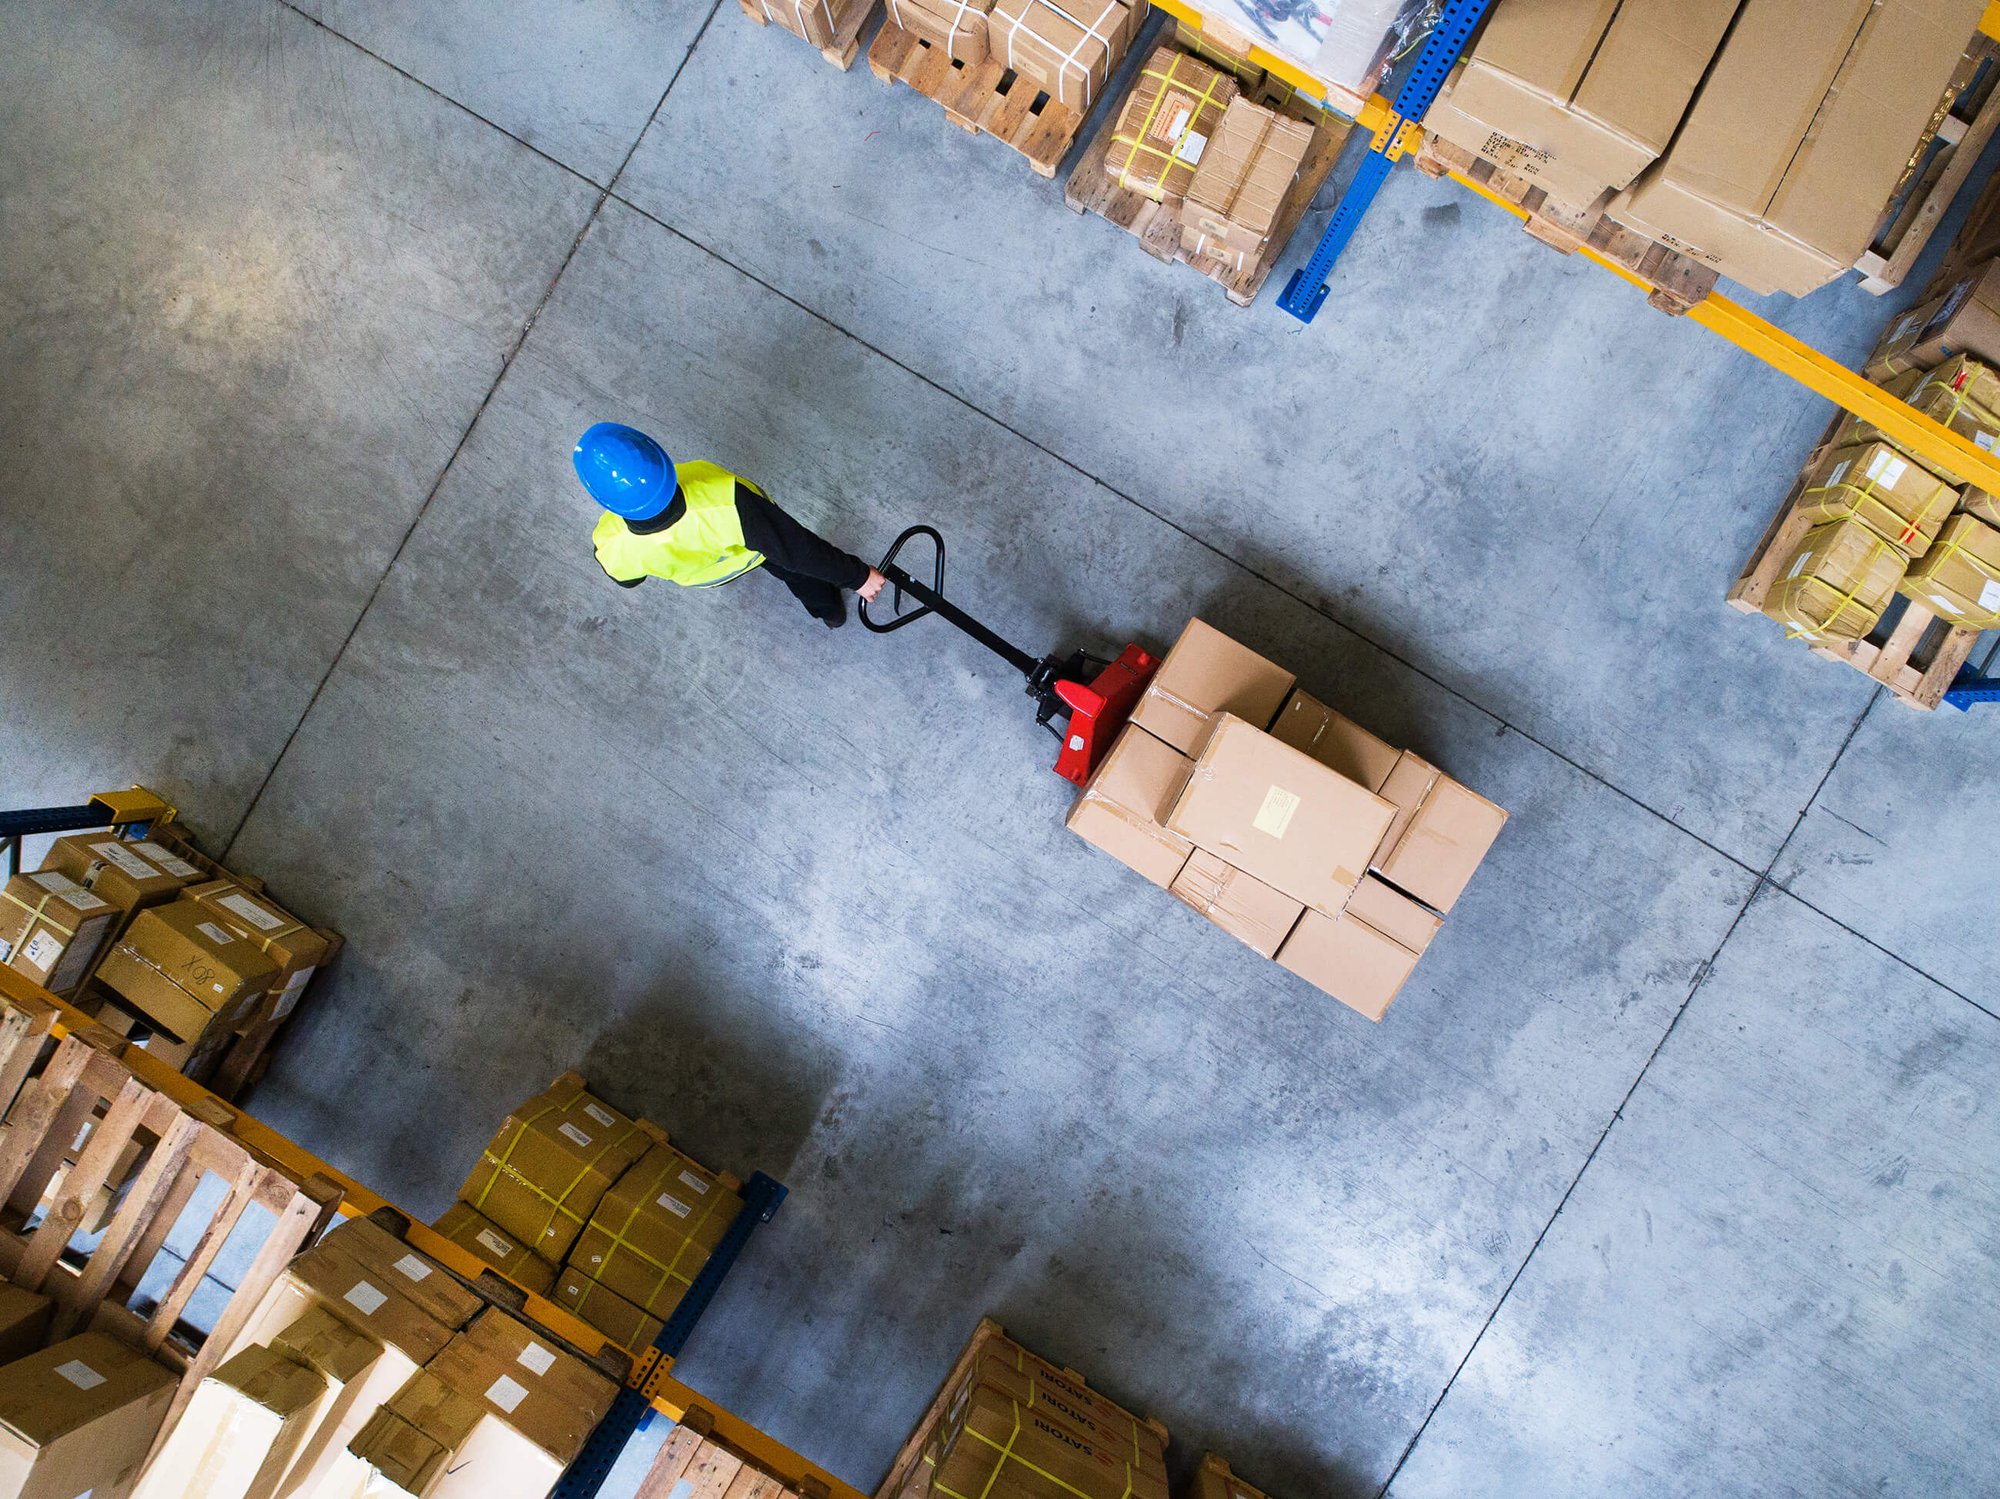 DAVACO logistics employee wearing yellow safety vest pulling a load of boxes in a warehouse.